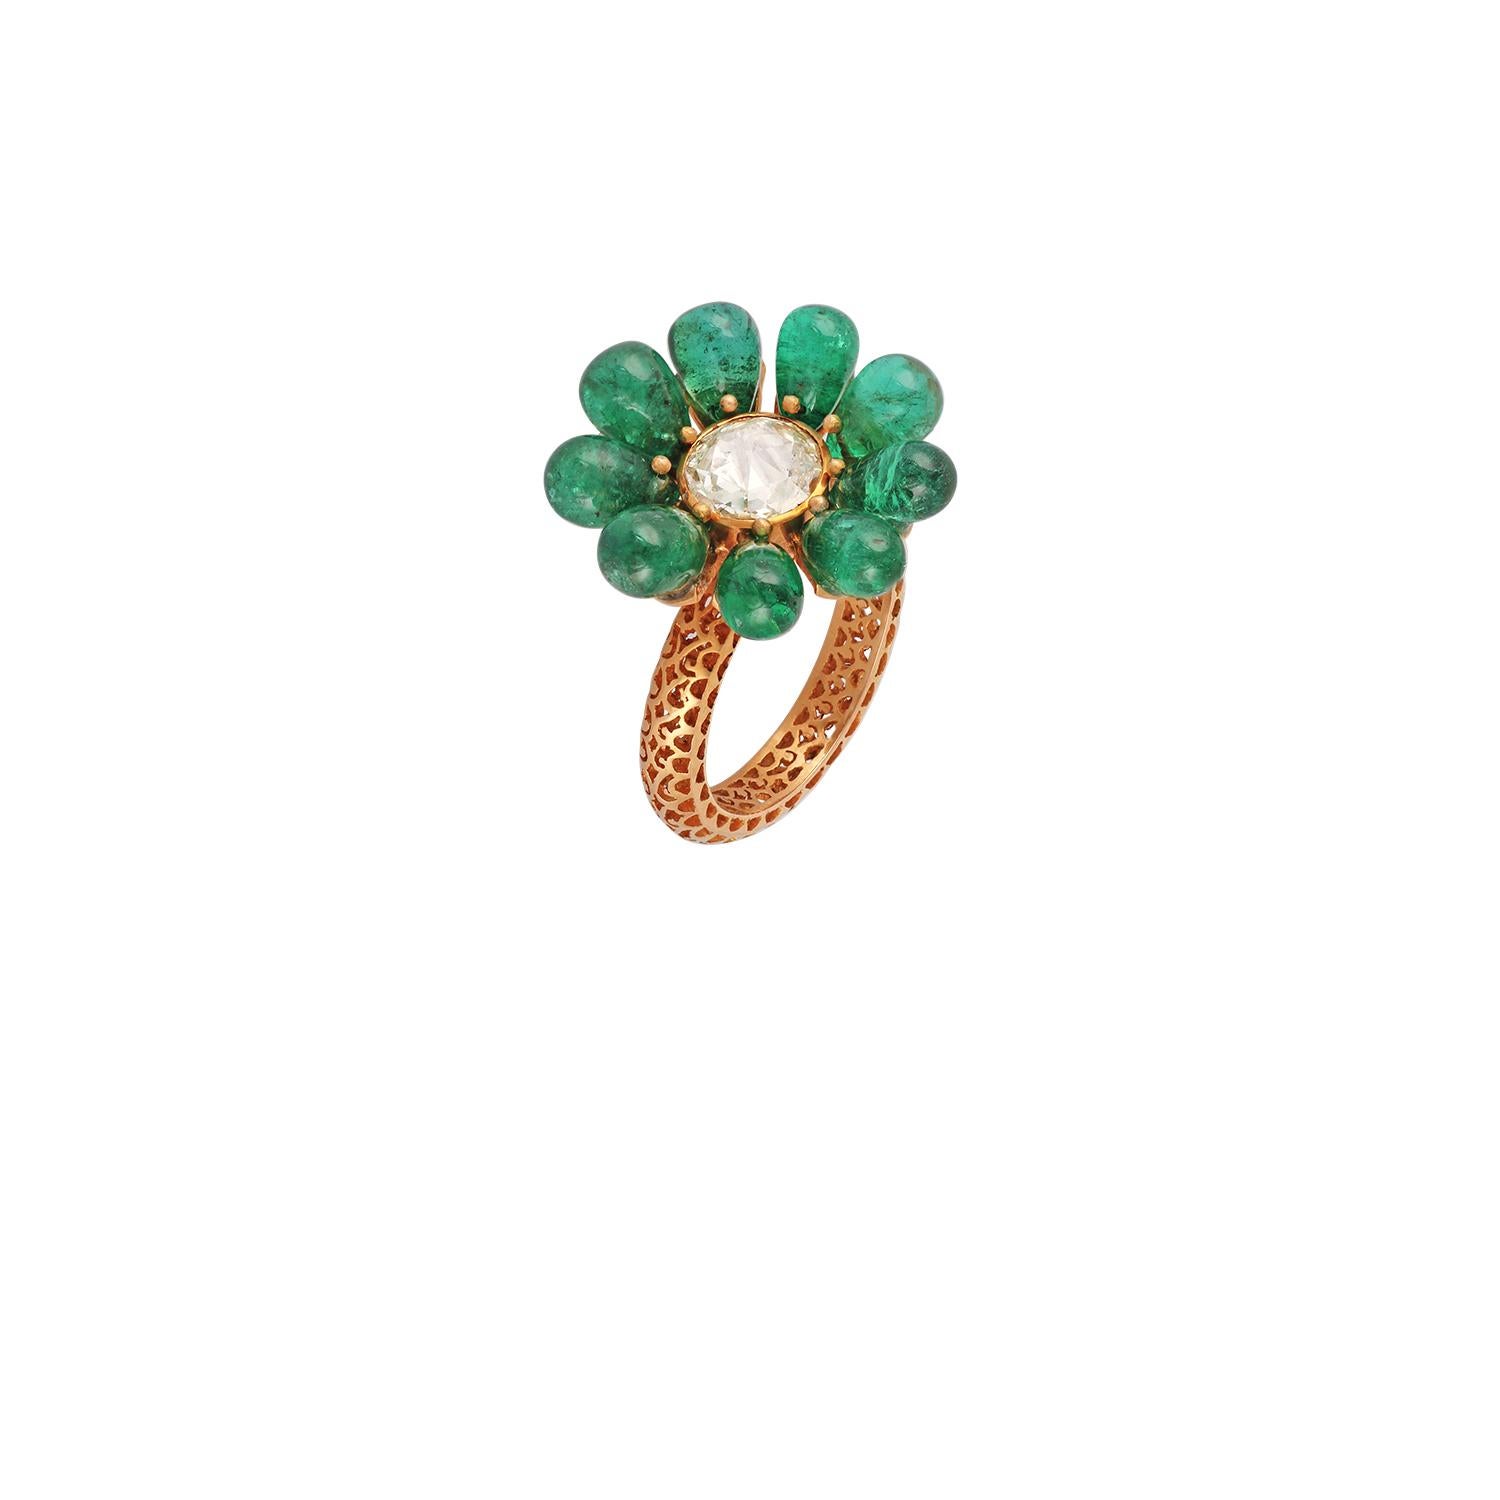 Contemporary Emerald and Diamond Ring Studded in 18 Karat Yellow Gold